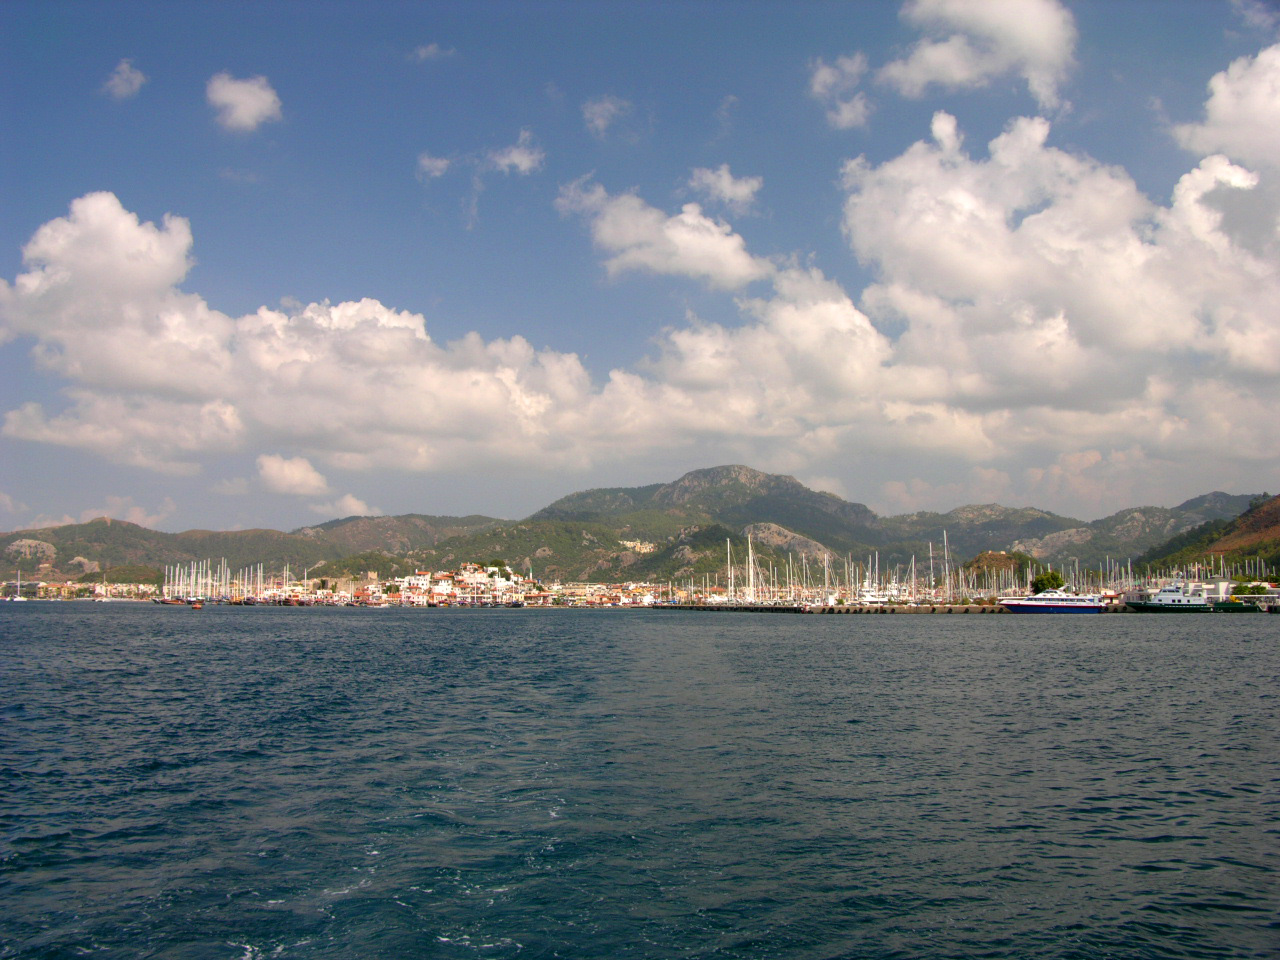 Wide view of Marmaris port area from a turist boat